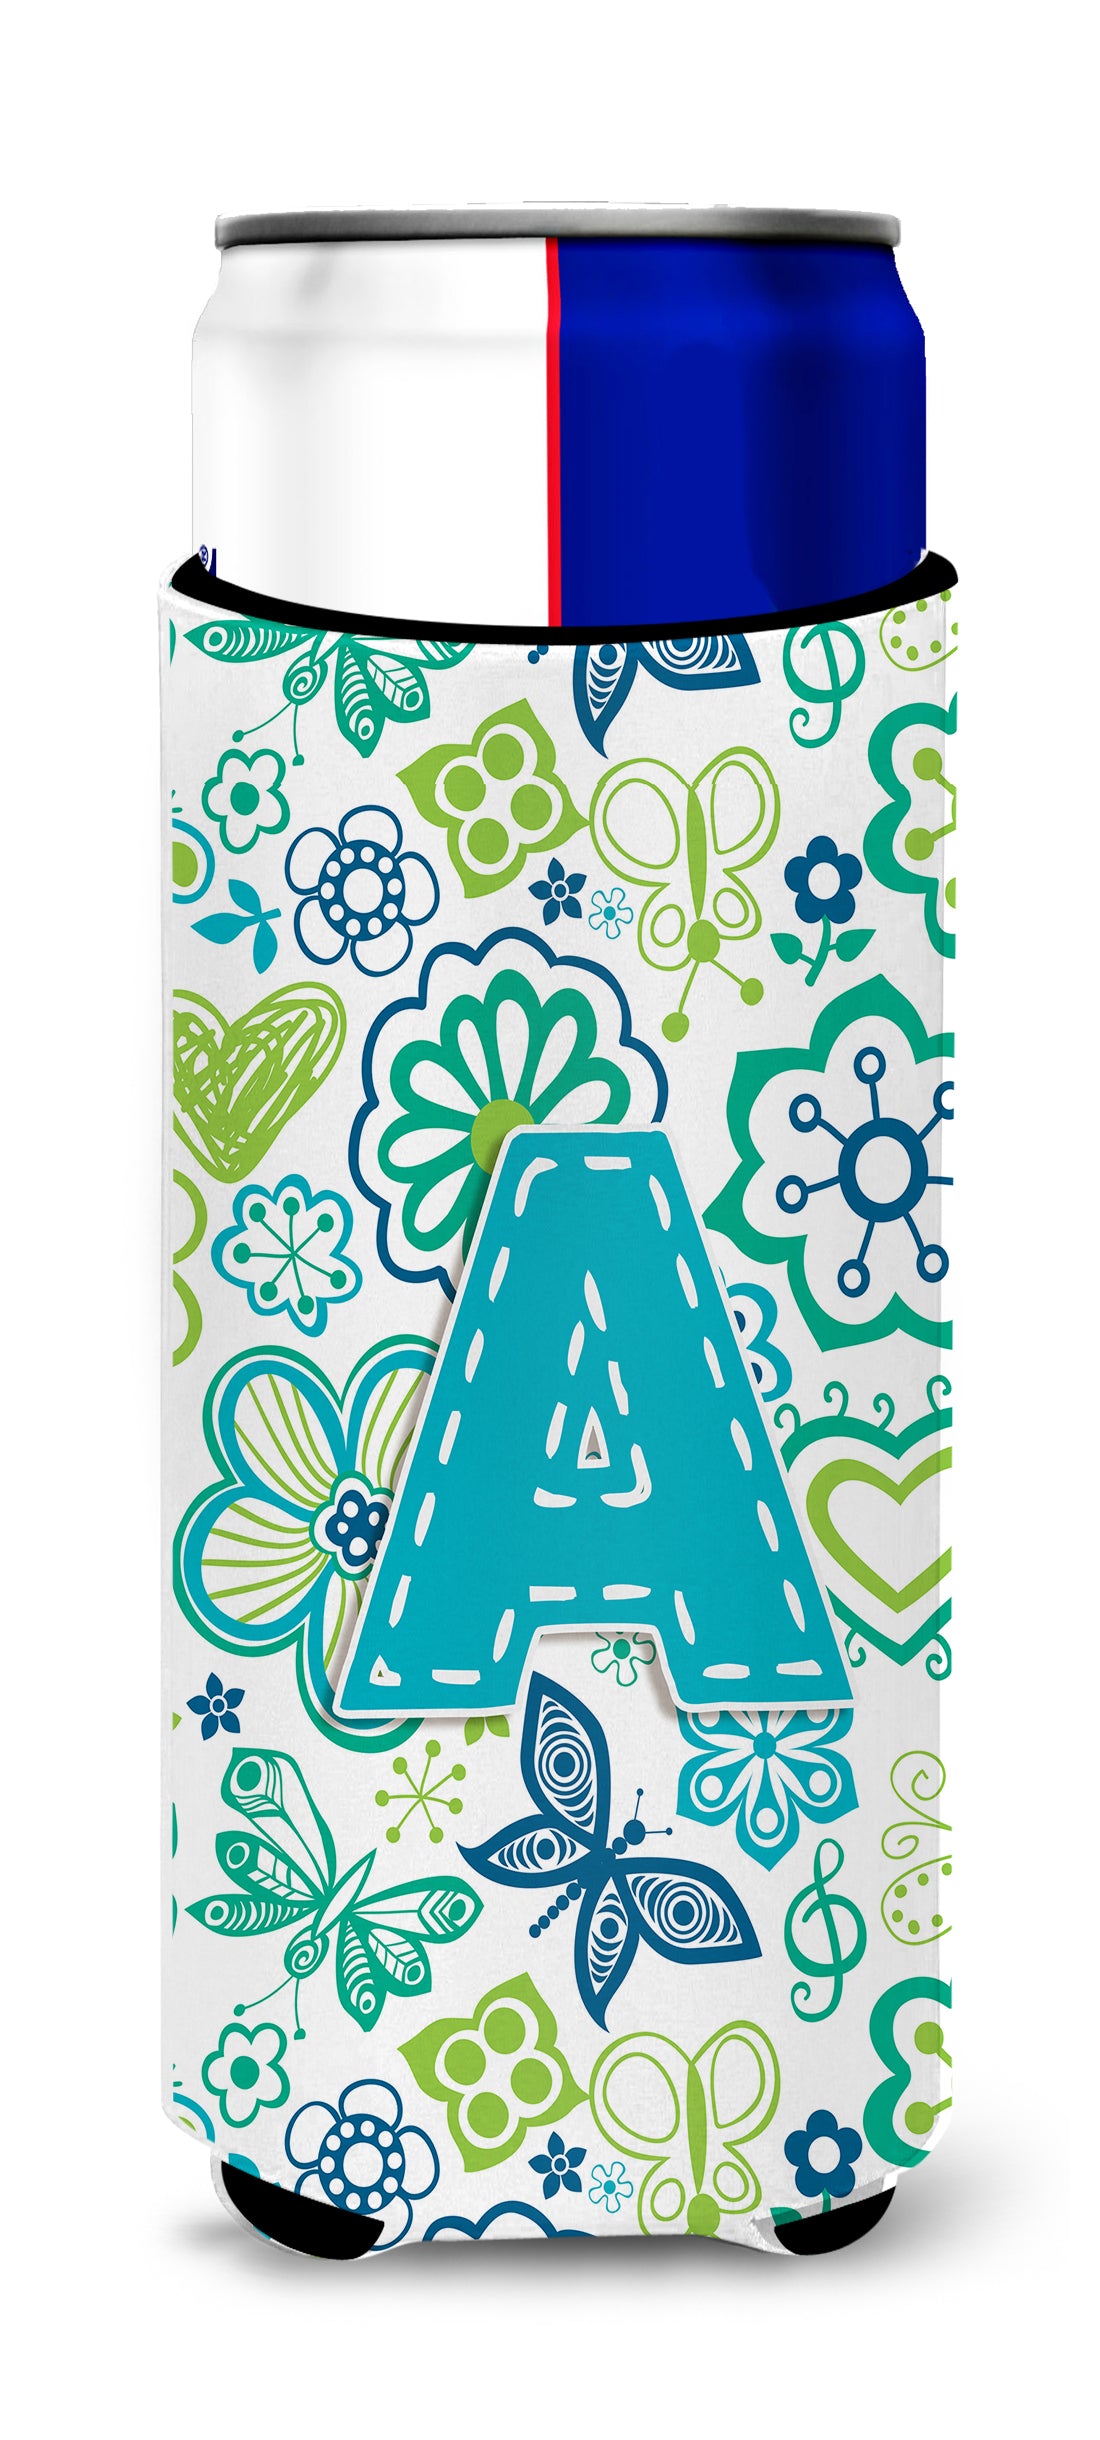 Letter A Flowers and Butterflies Teal Blue Ultra Beverage Insulators for slim cans CJ2006-AMUK.